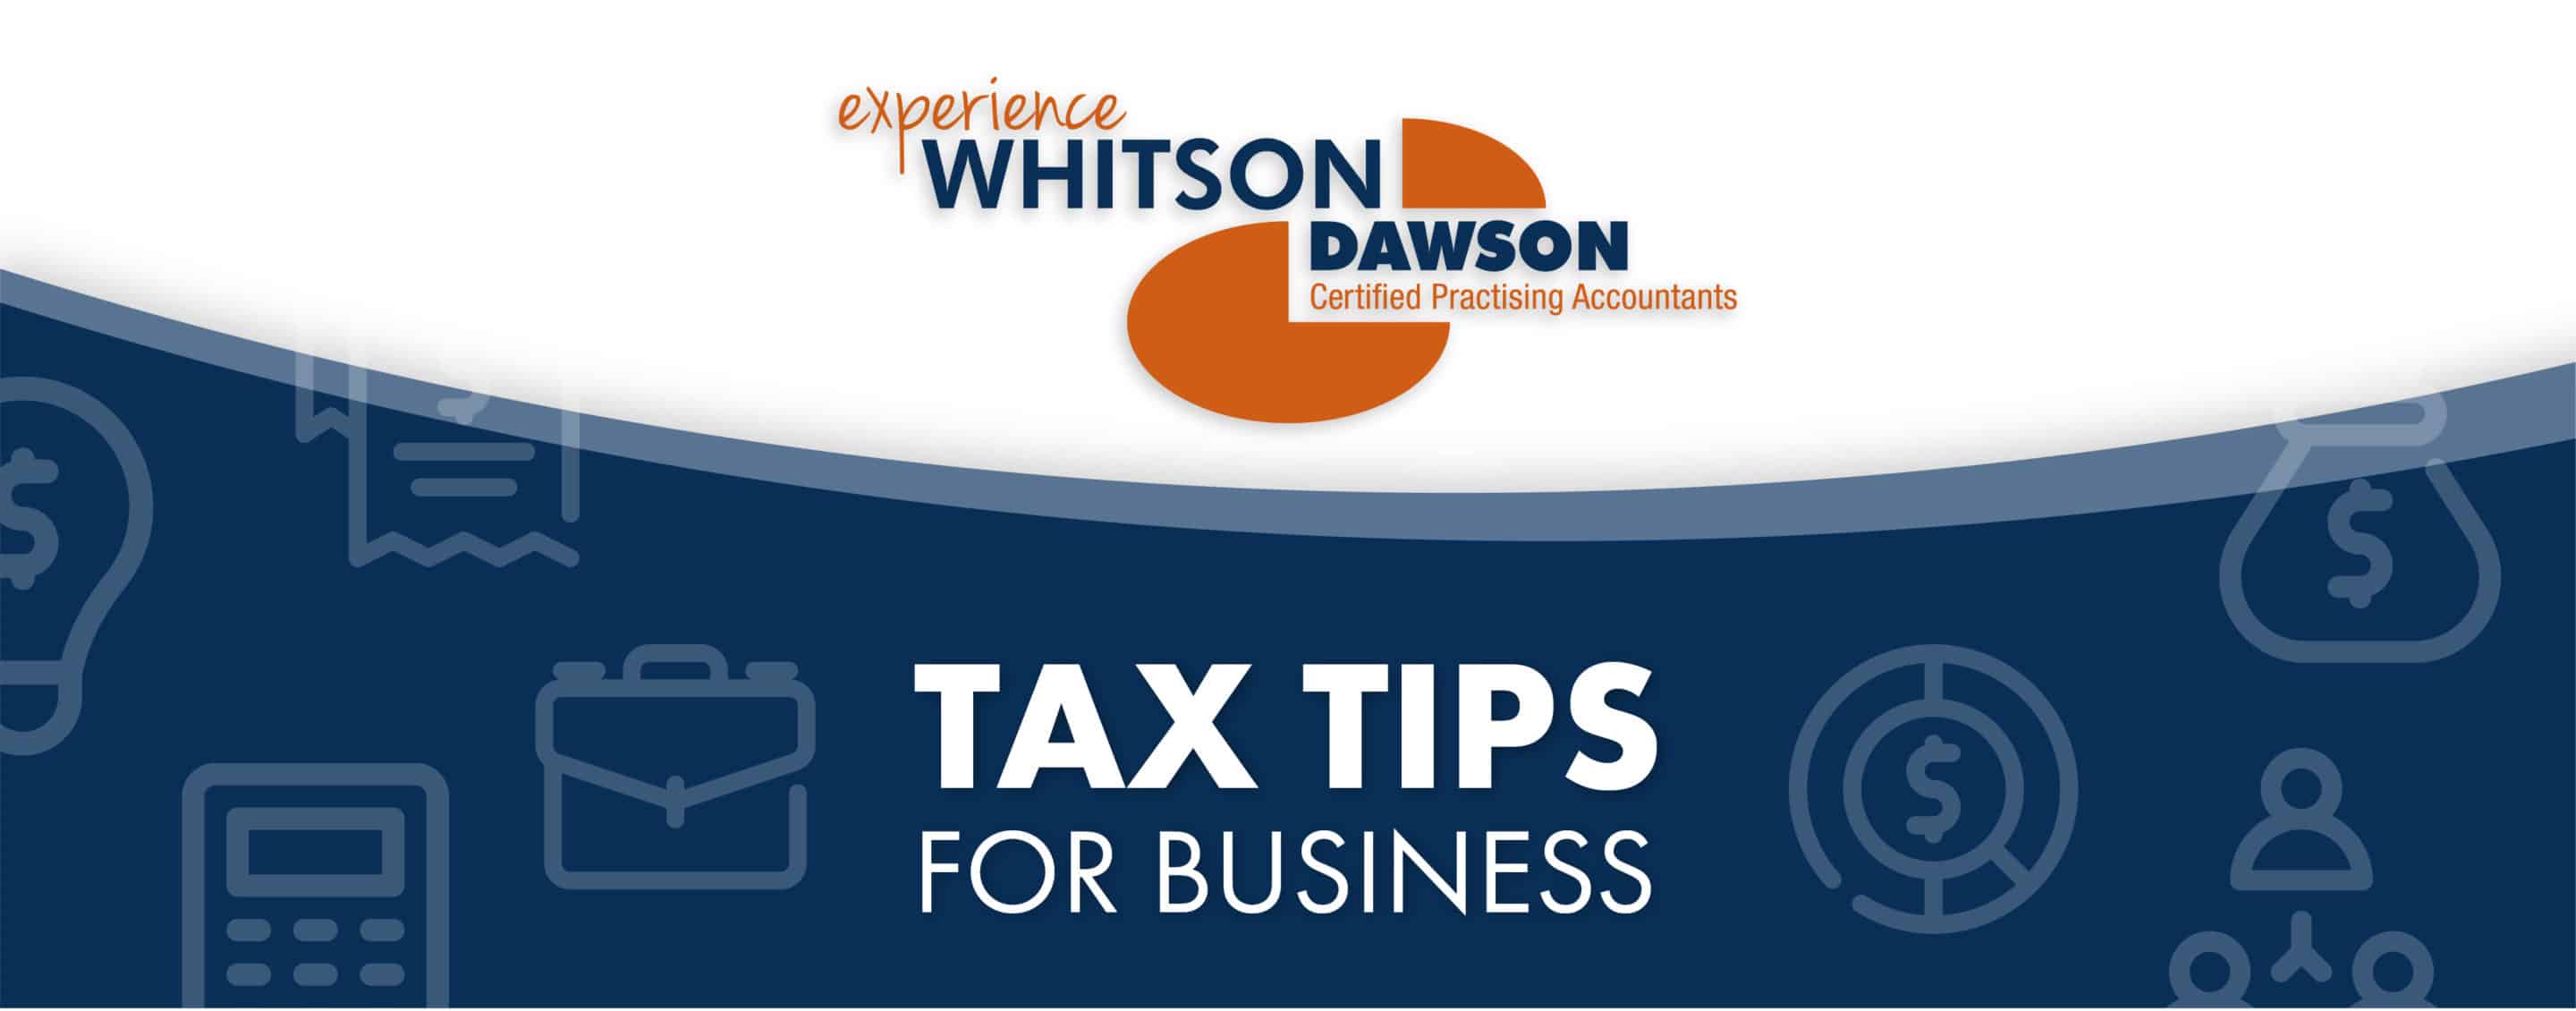 Tax tips for small business